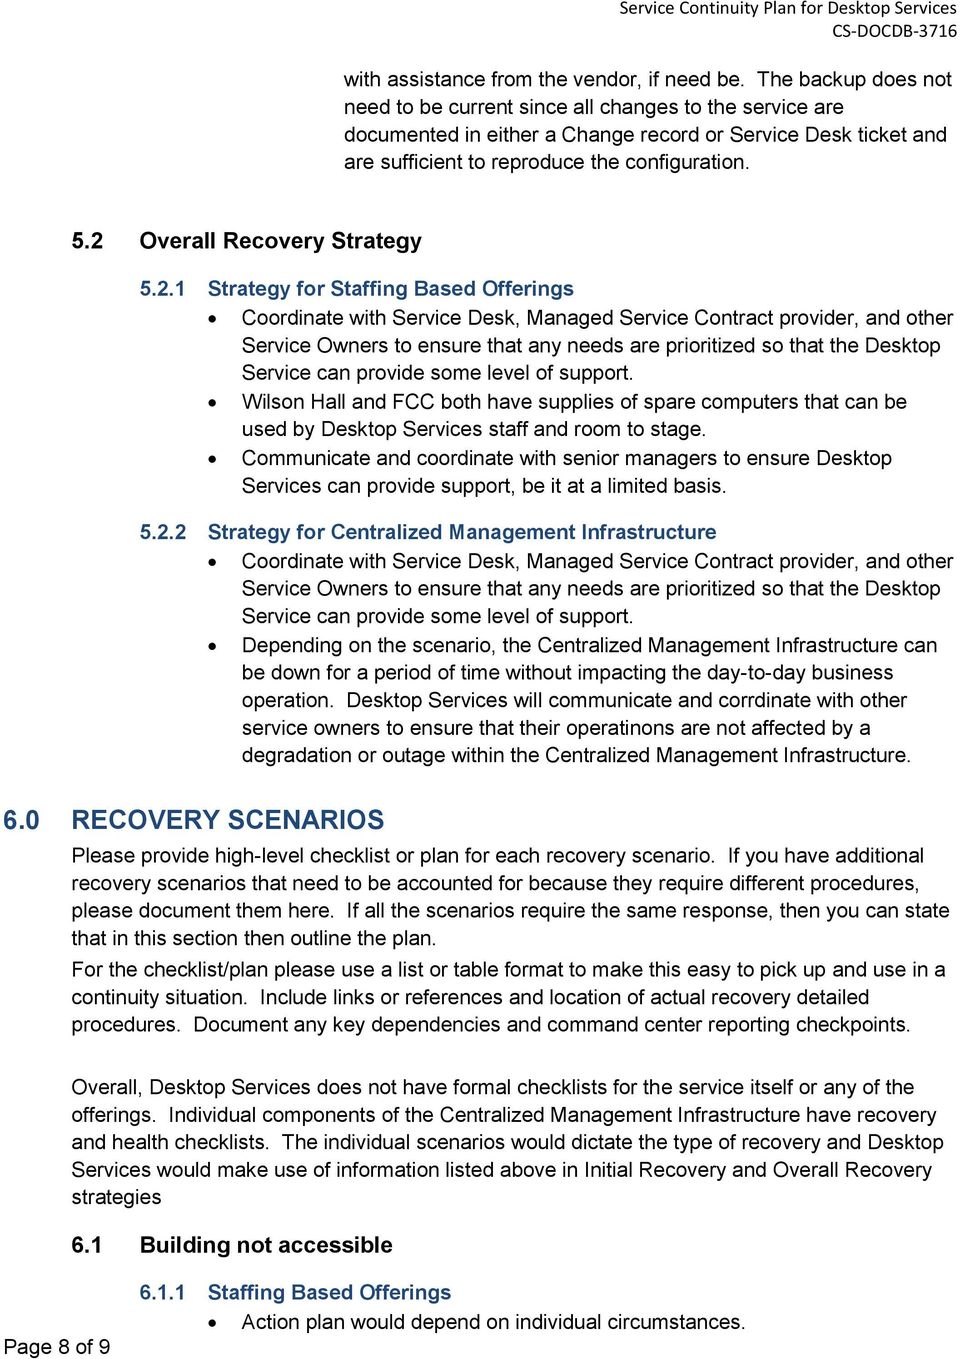 2 Overall Recvery Strategy 5.2.1 Strategy fr Staffing Based Offerings Crdinate with Service Desk, Managed Service Cntract prvider, and ther s t ensure that any needs are priritized s that the Desktp